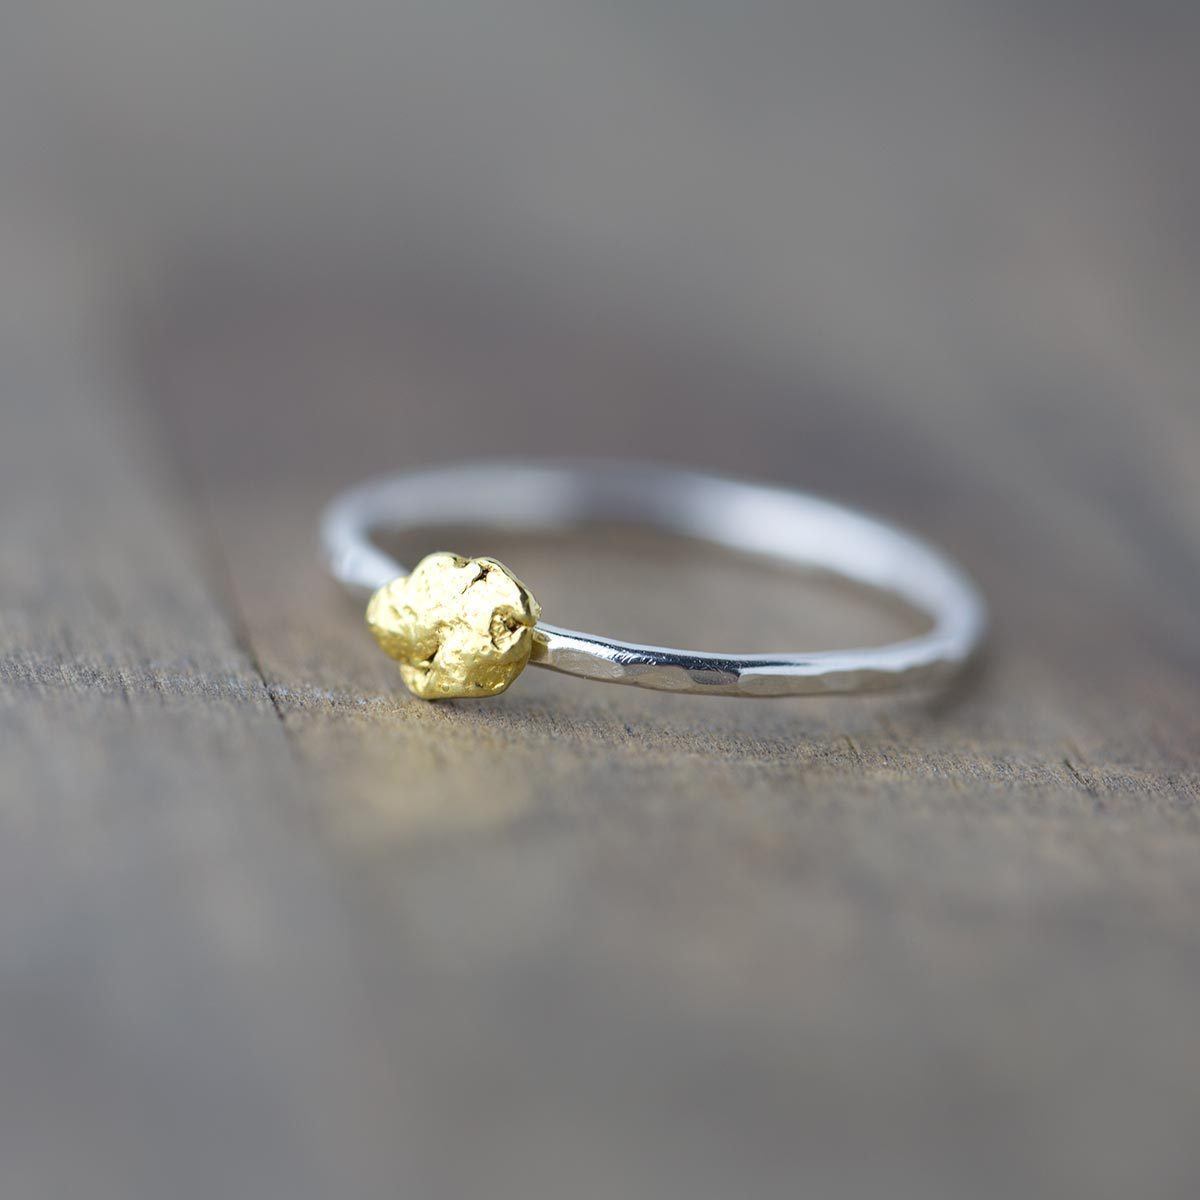 Alaska Gold Nugget &amp; Sterling Silver Ring - Handmade Jewelry by Burnish